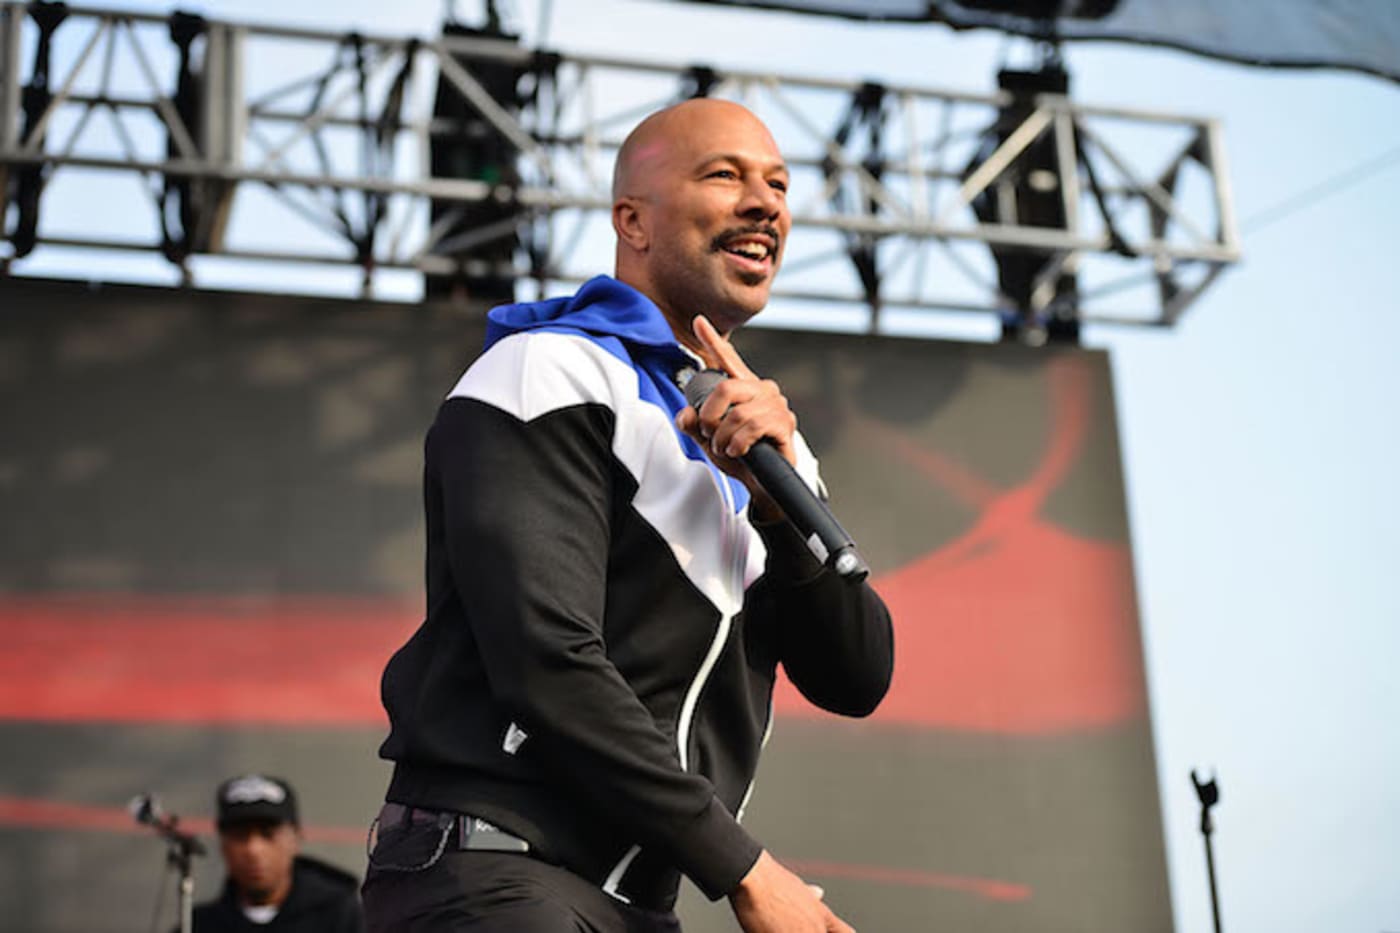 Common on Working With Starbucks for Anti-Bias Training: ‘I Wanted to ...